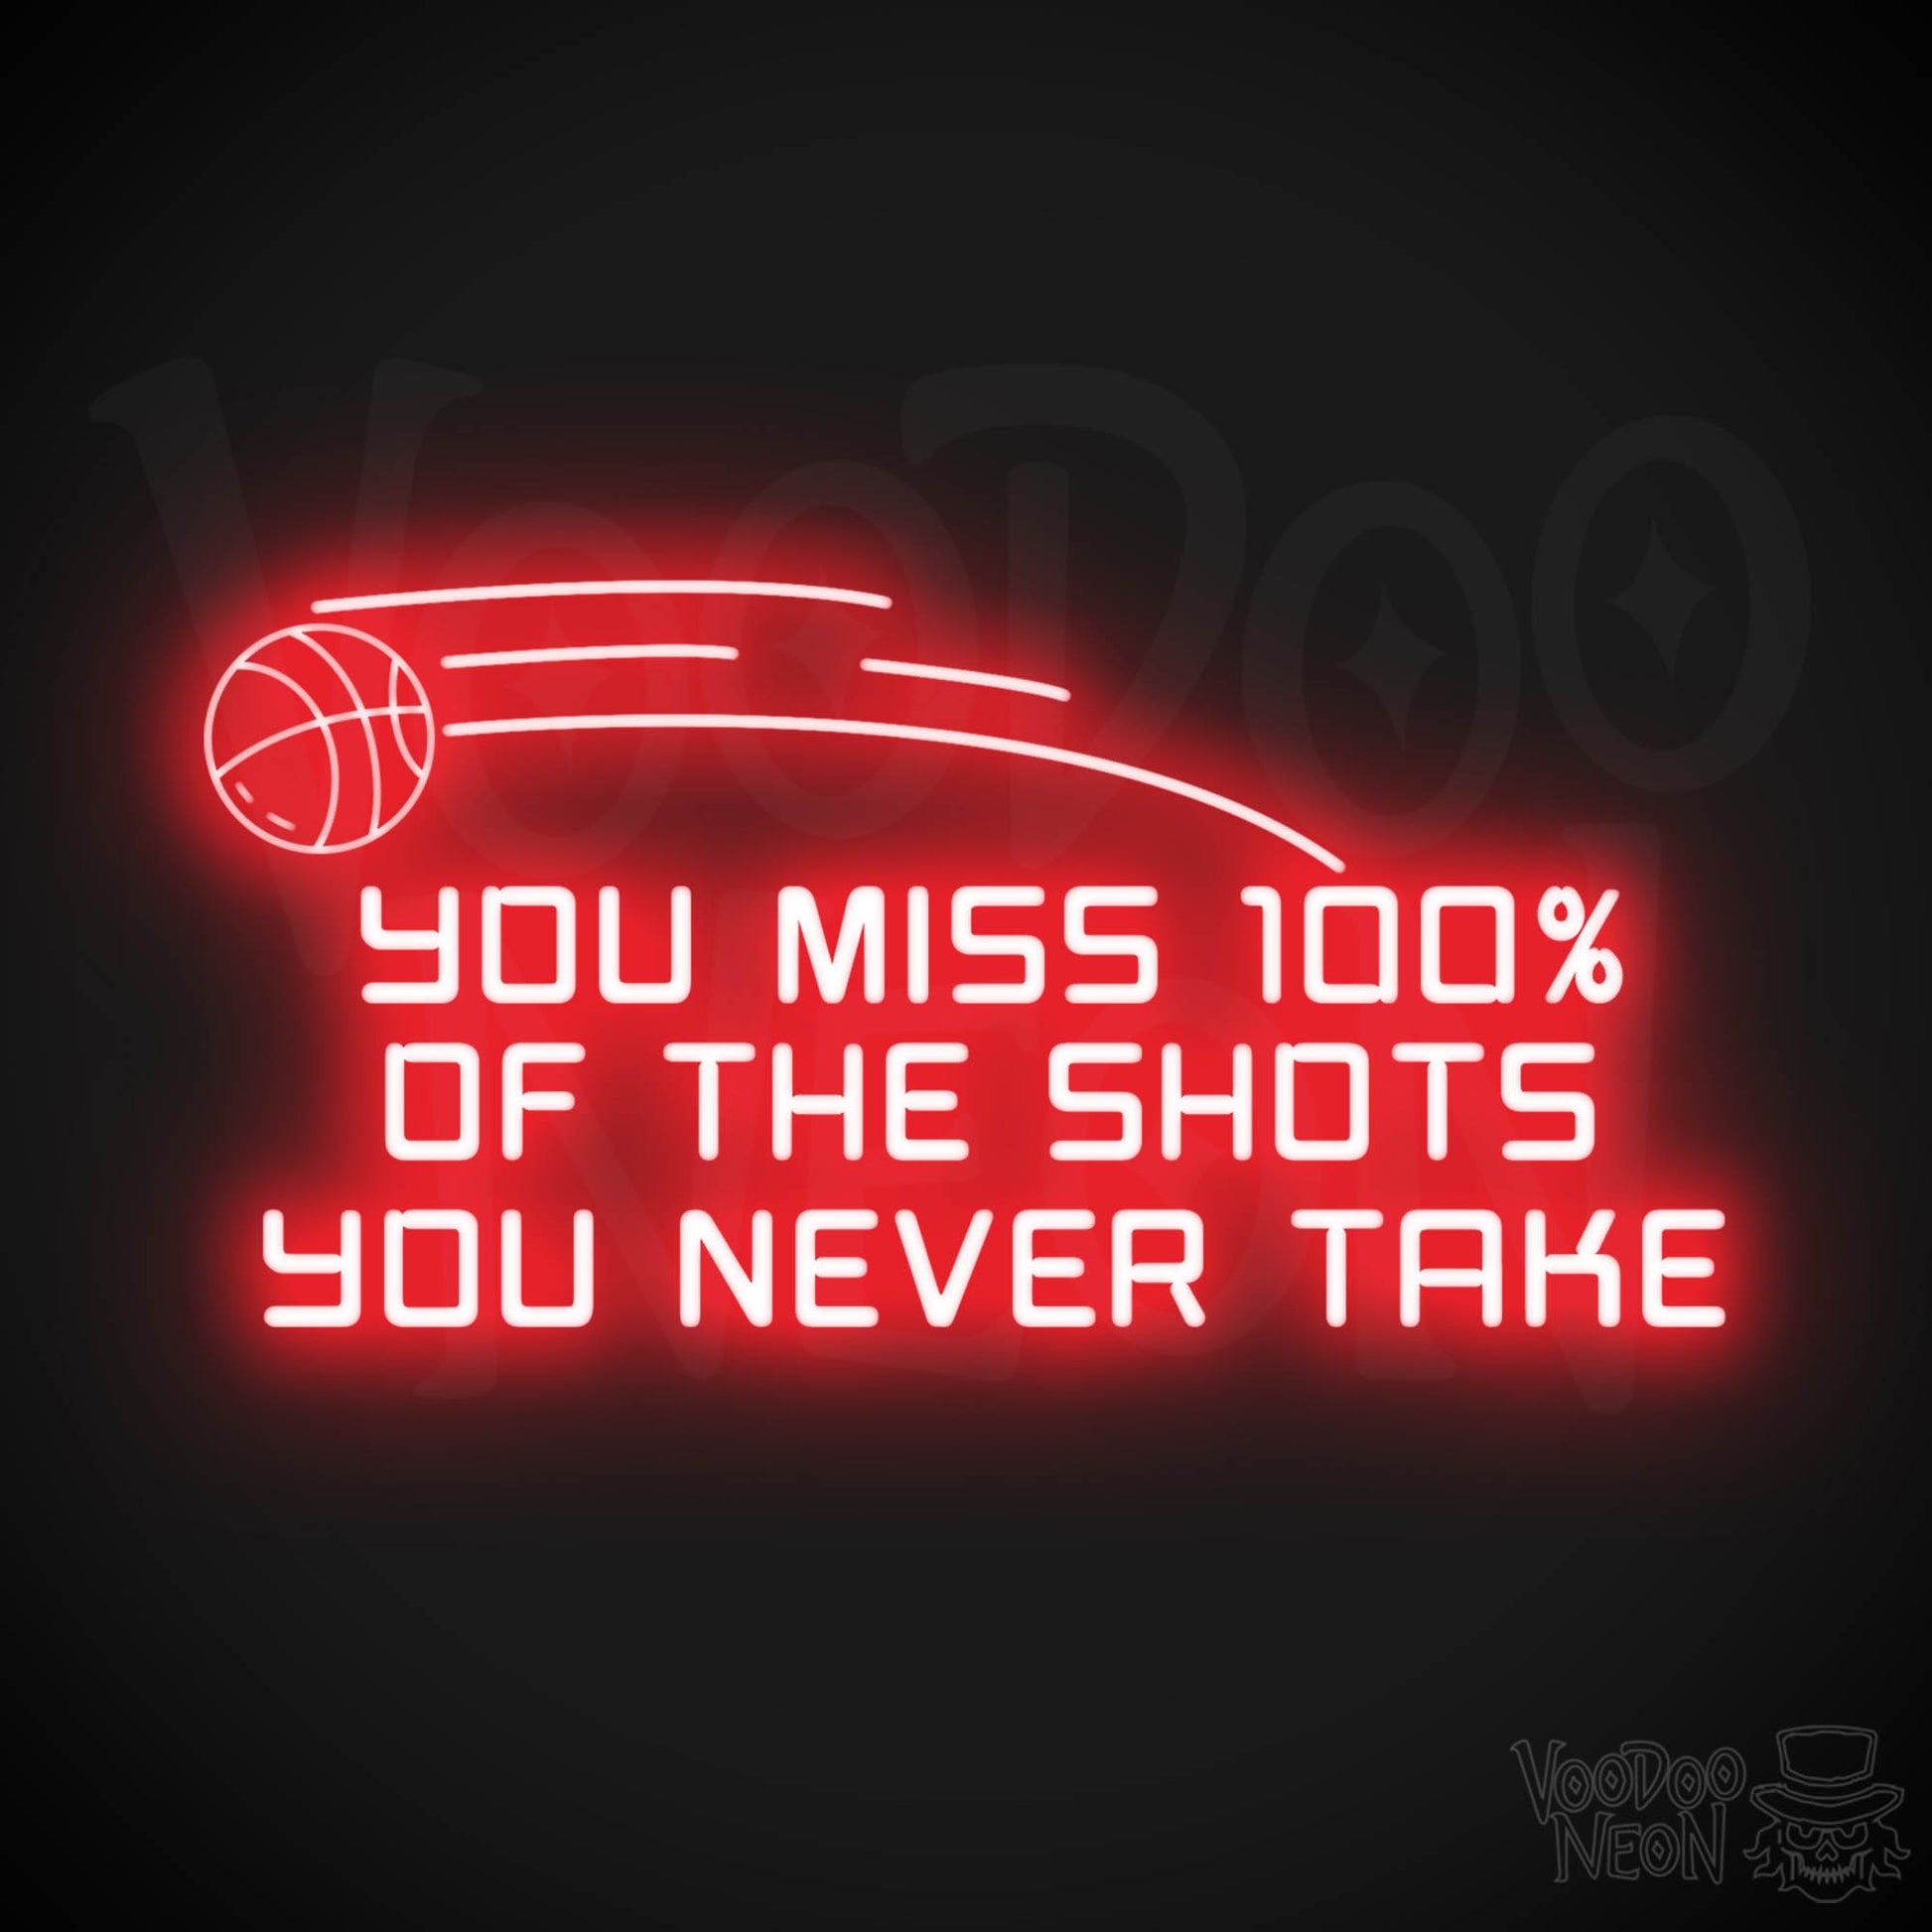 You Miss 100% of the Shots You Never Take Neon Sign - Neon Wall Art - Inspirational Signs - Color Red